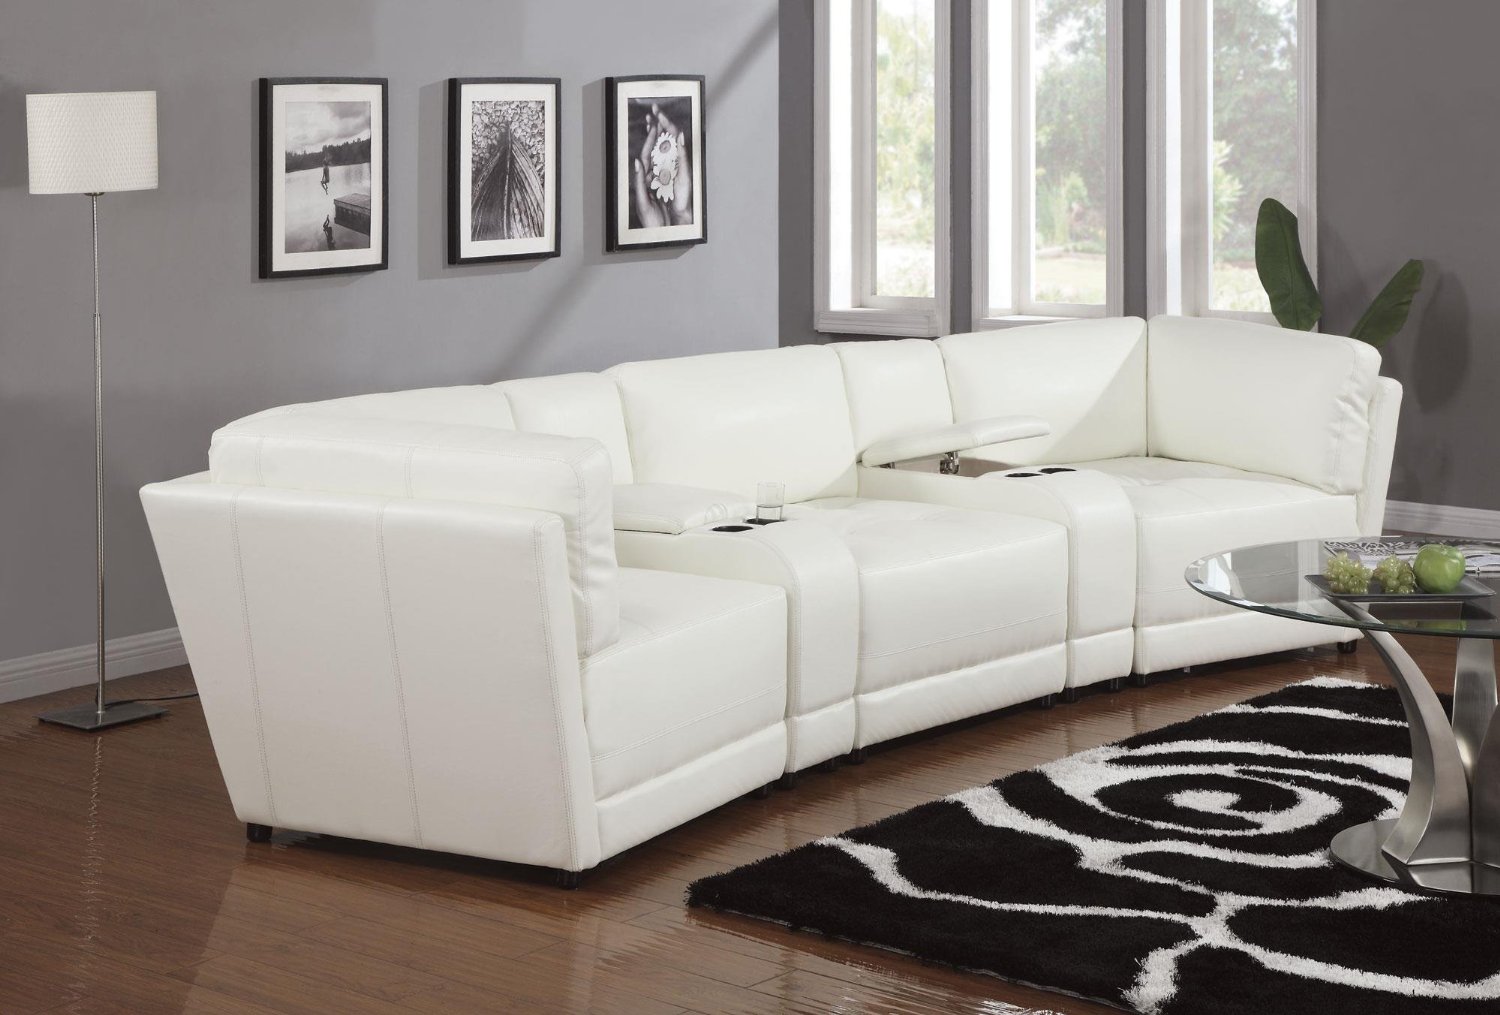 small white leather sectional sofa